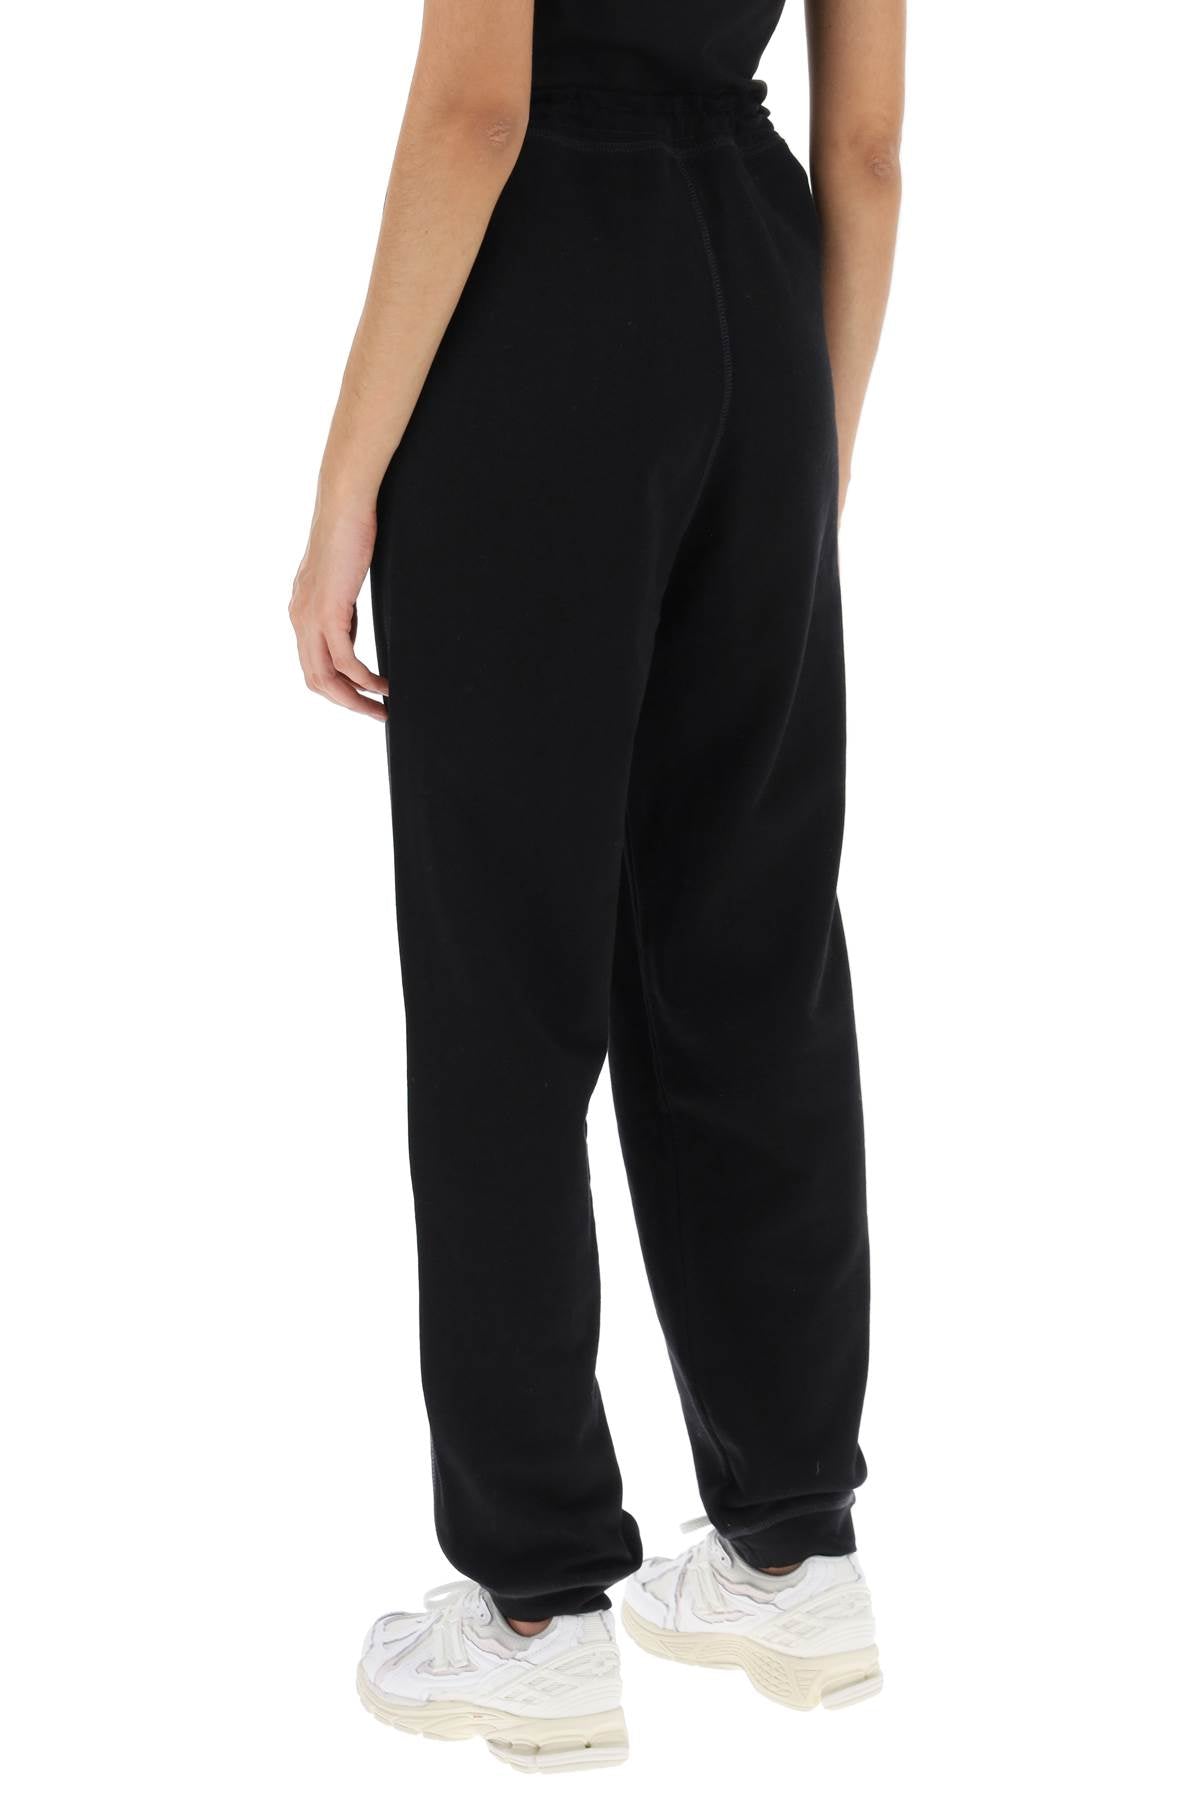 Ganni Ganni joggers in cotton french terry